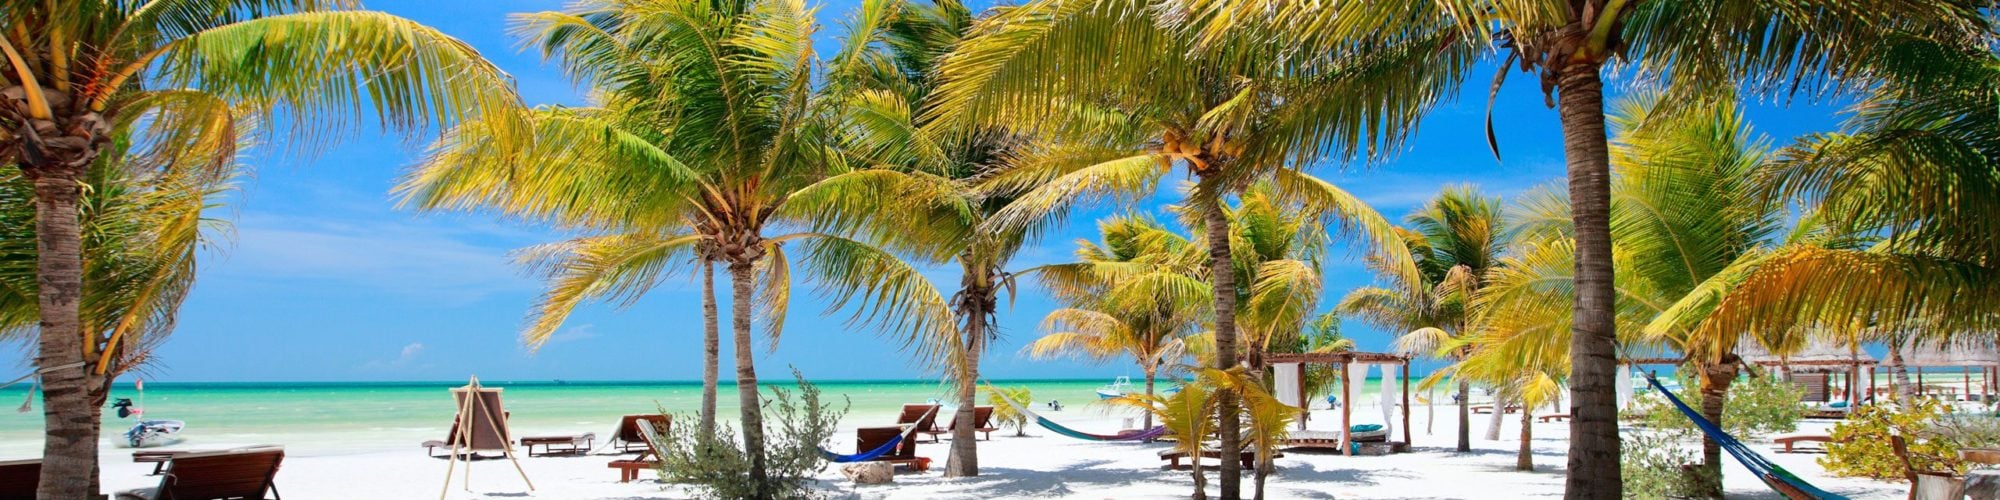 Holbox Island travel agents packages deals